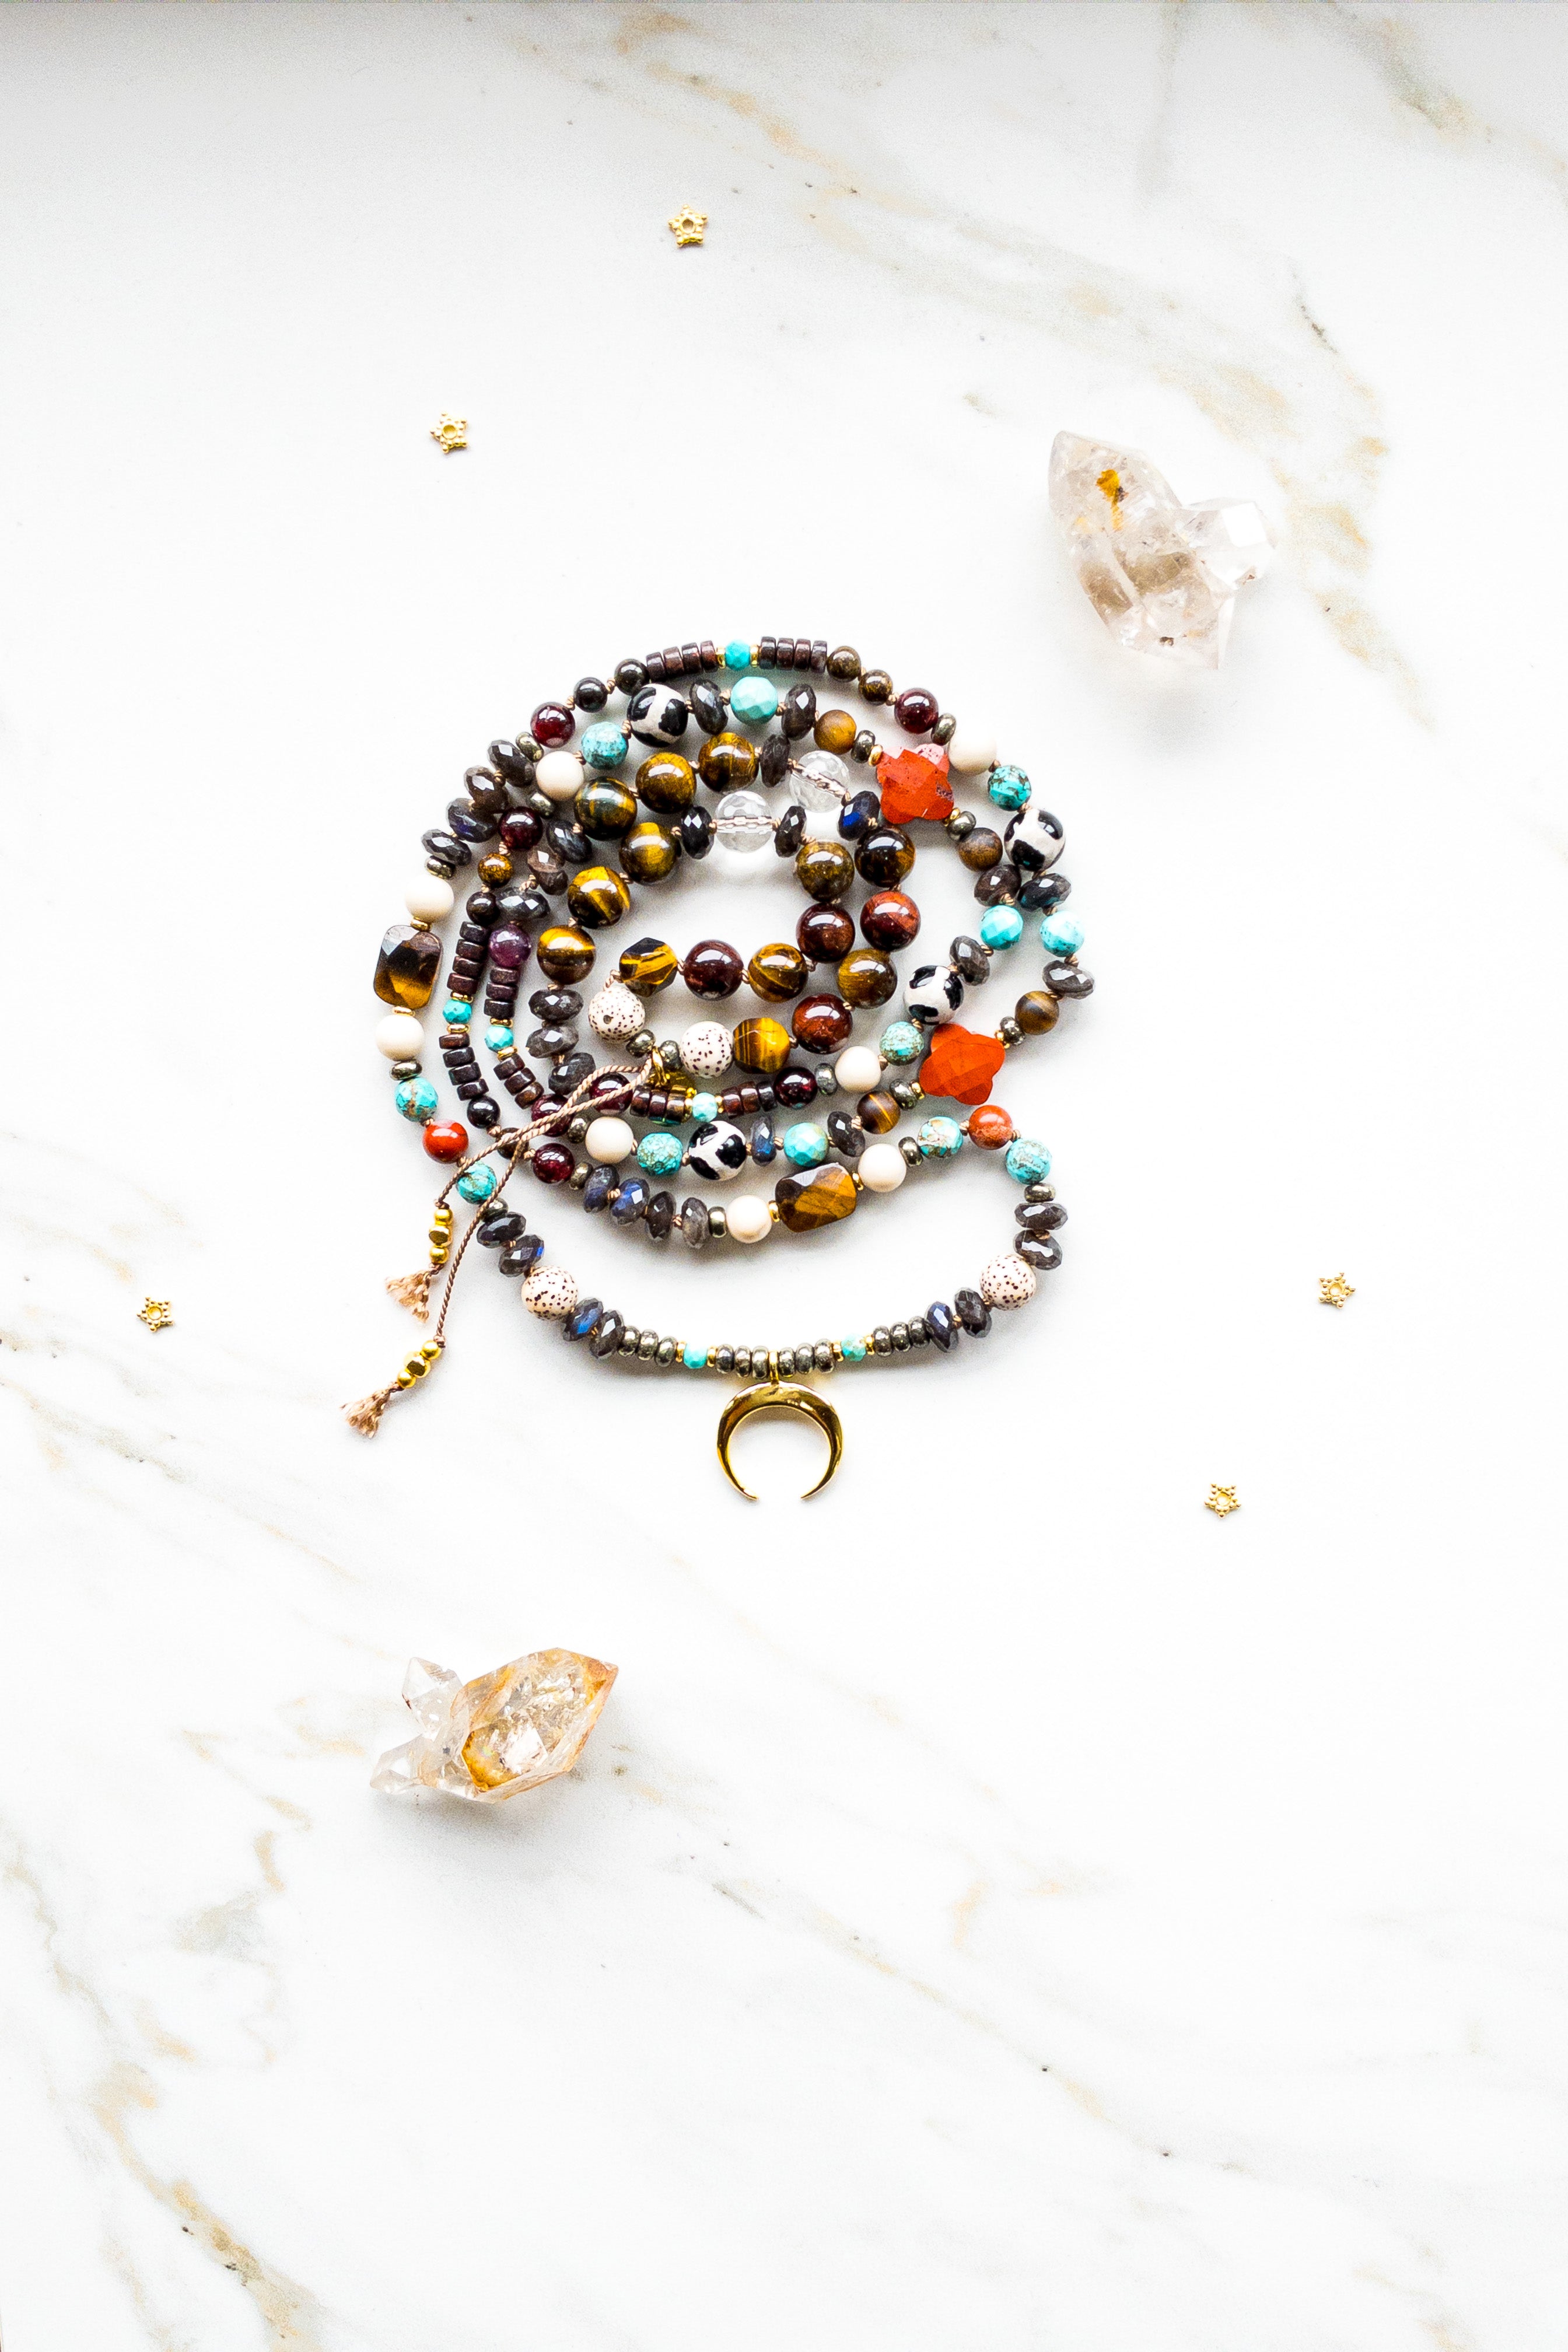 Goddess Mala Necklace: Divine Energy and Serenity - Indradhanush Collection - shashā jewellery 